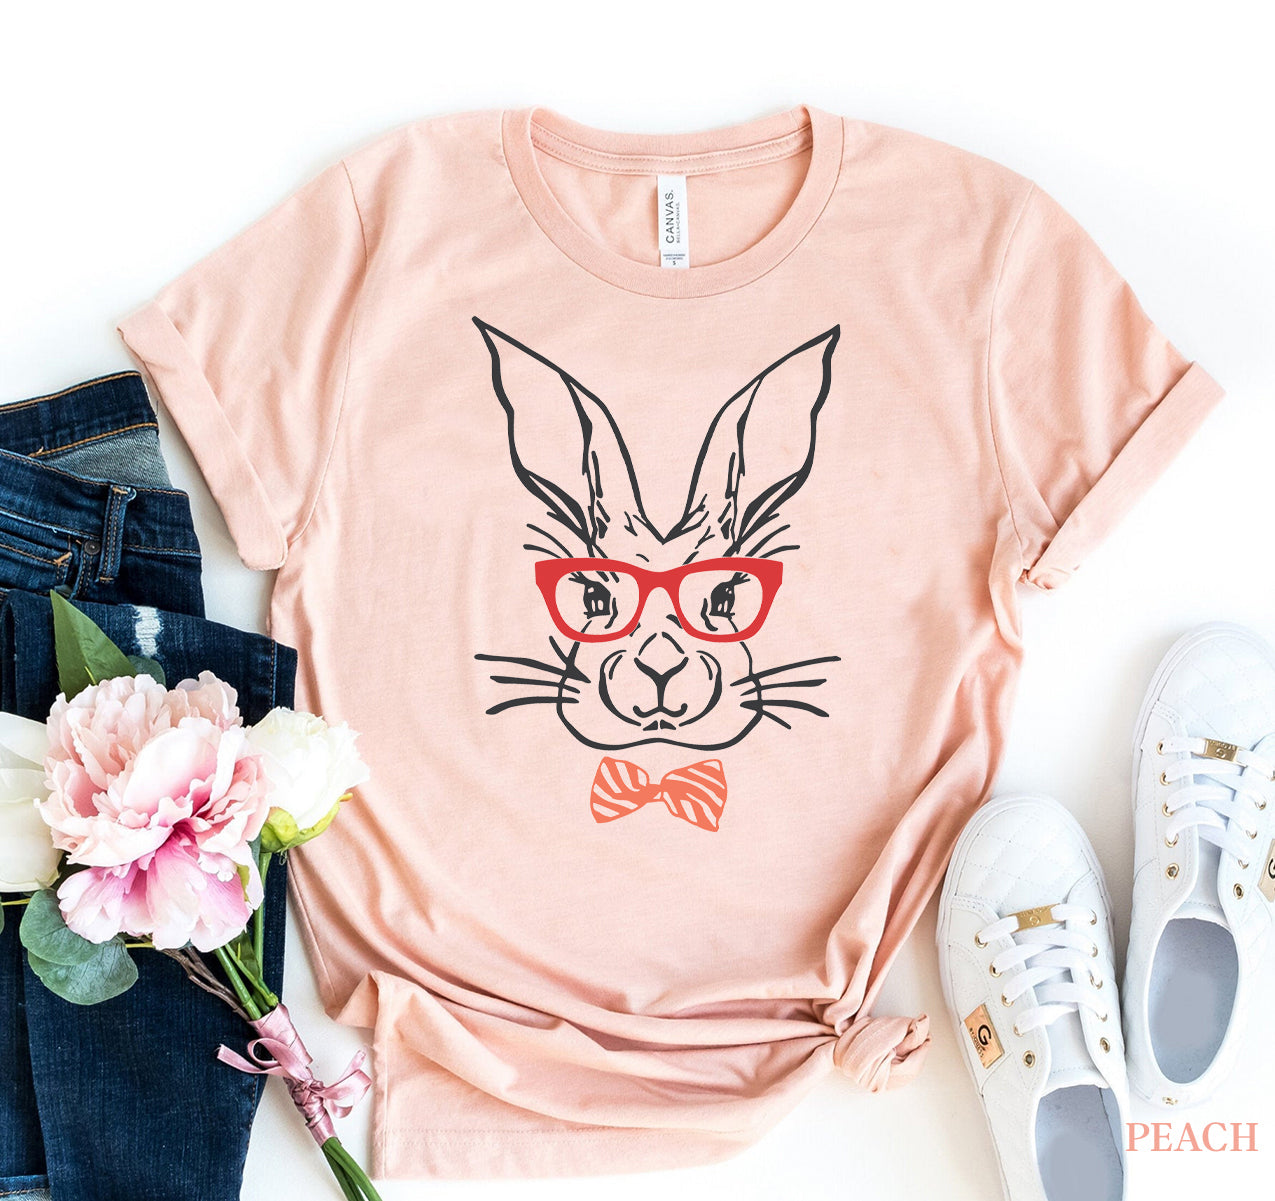 Easter Bunny With Glasses Shirt | White Caeneus